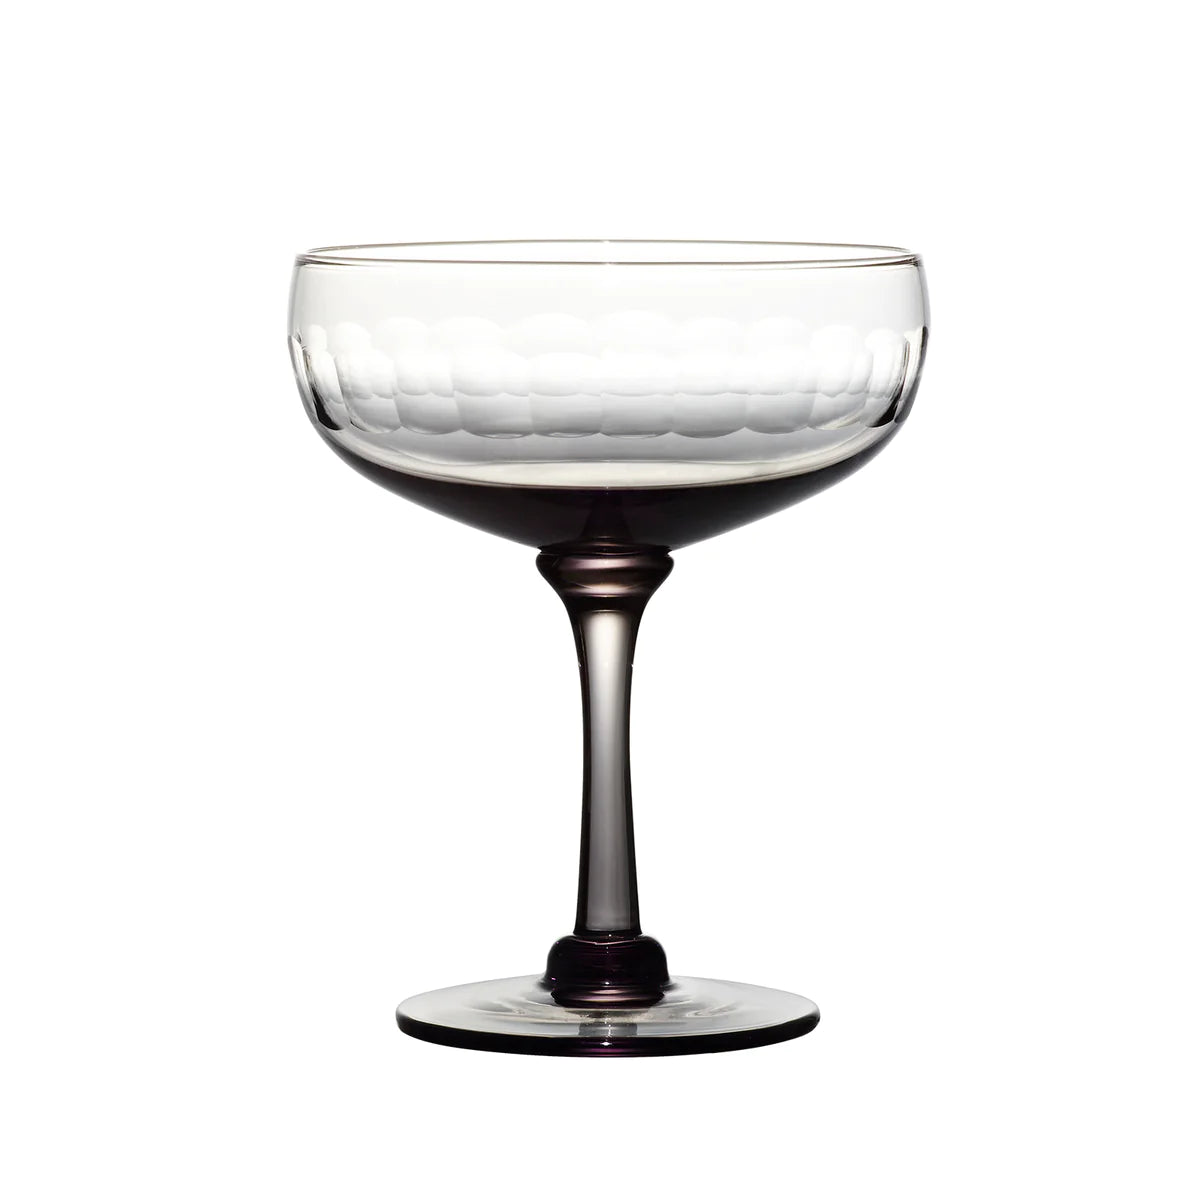 Smoky Cocktail Glasses With Lens Design, Set of 4